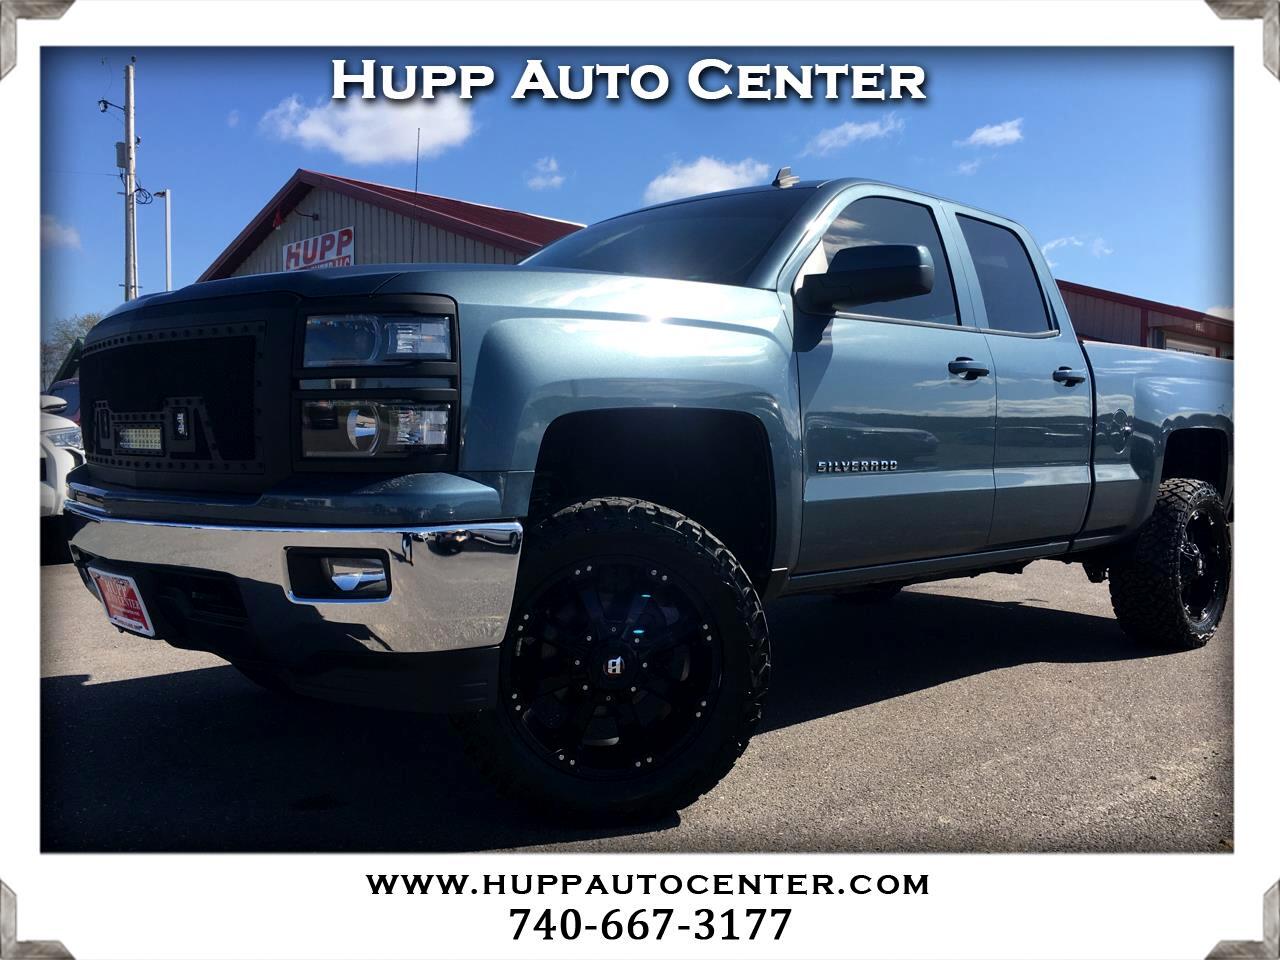 Used 14 Chevrolet Silverado 1500 2lt Double Cab 4wd For Sale In Tuppers Plains Oh 457 Hupp Auto Center